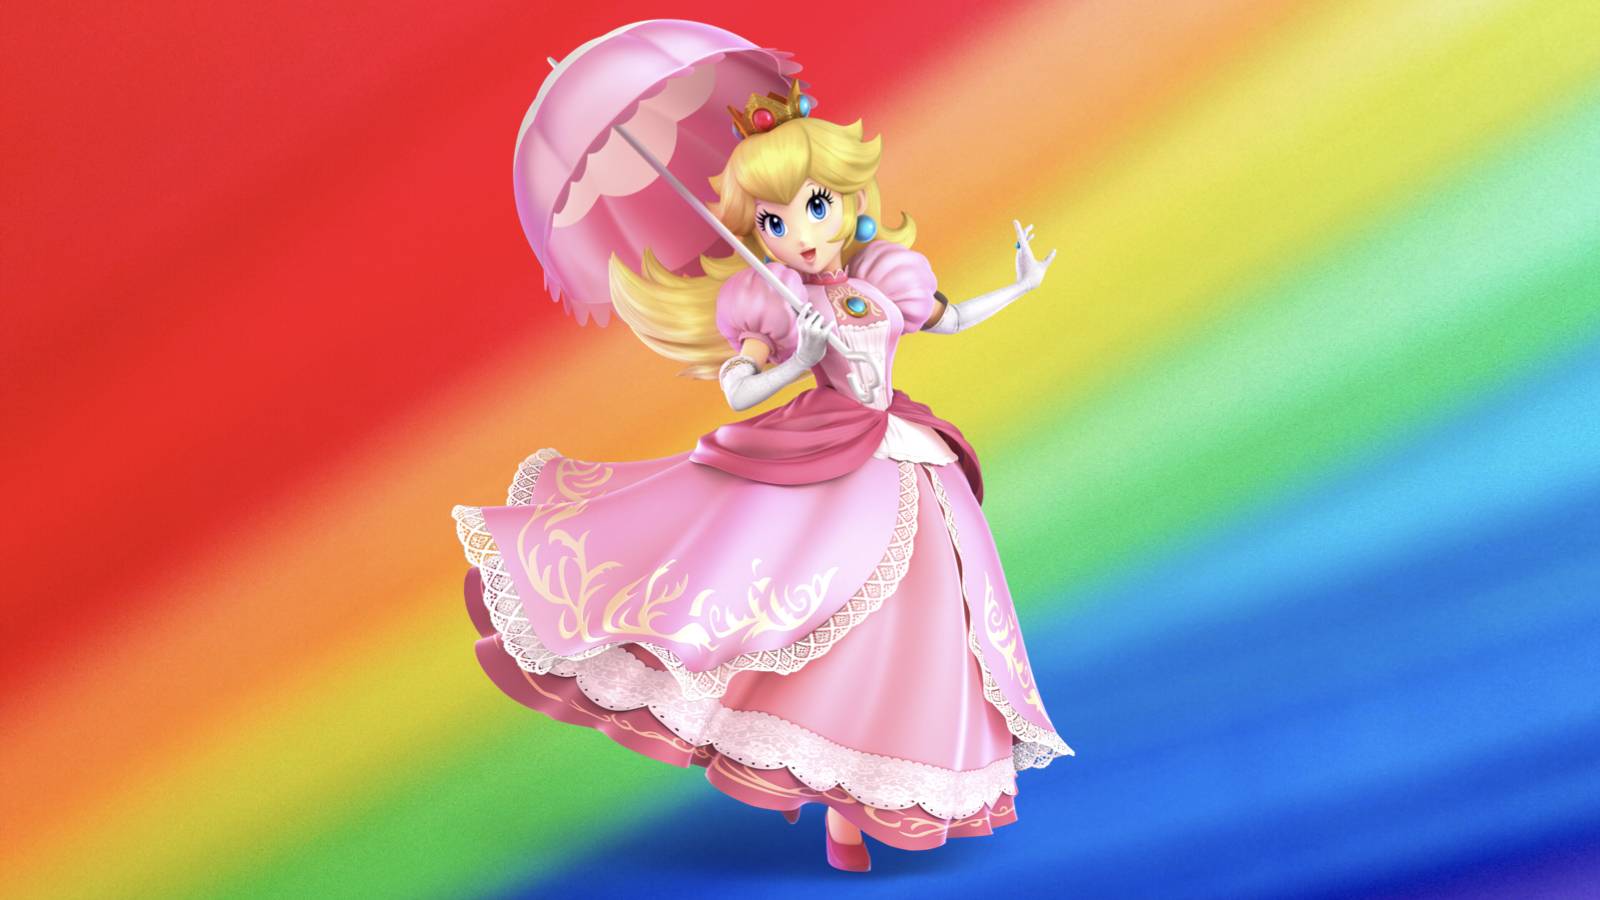 From Damsel to Defender: Stanning Princess Peach, Nintendo's Queer Icon